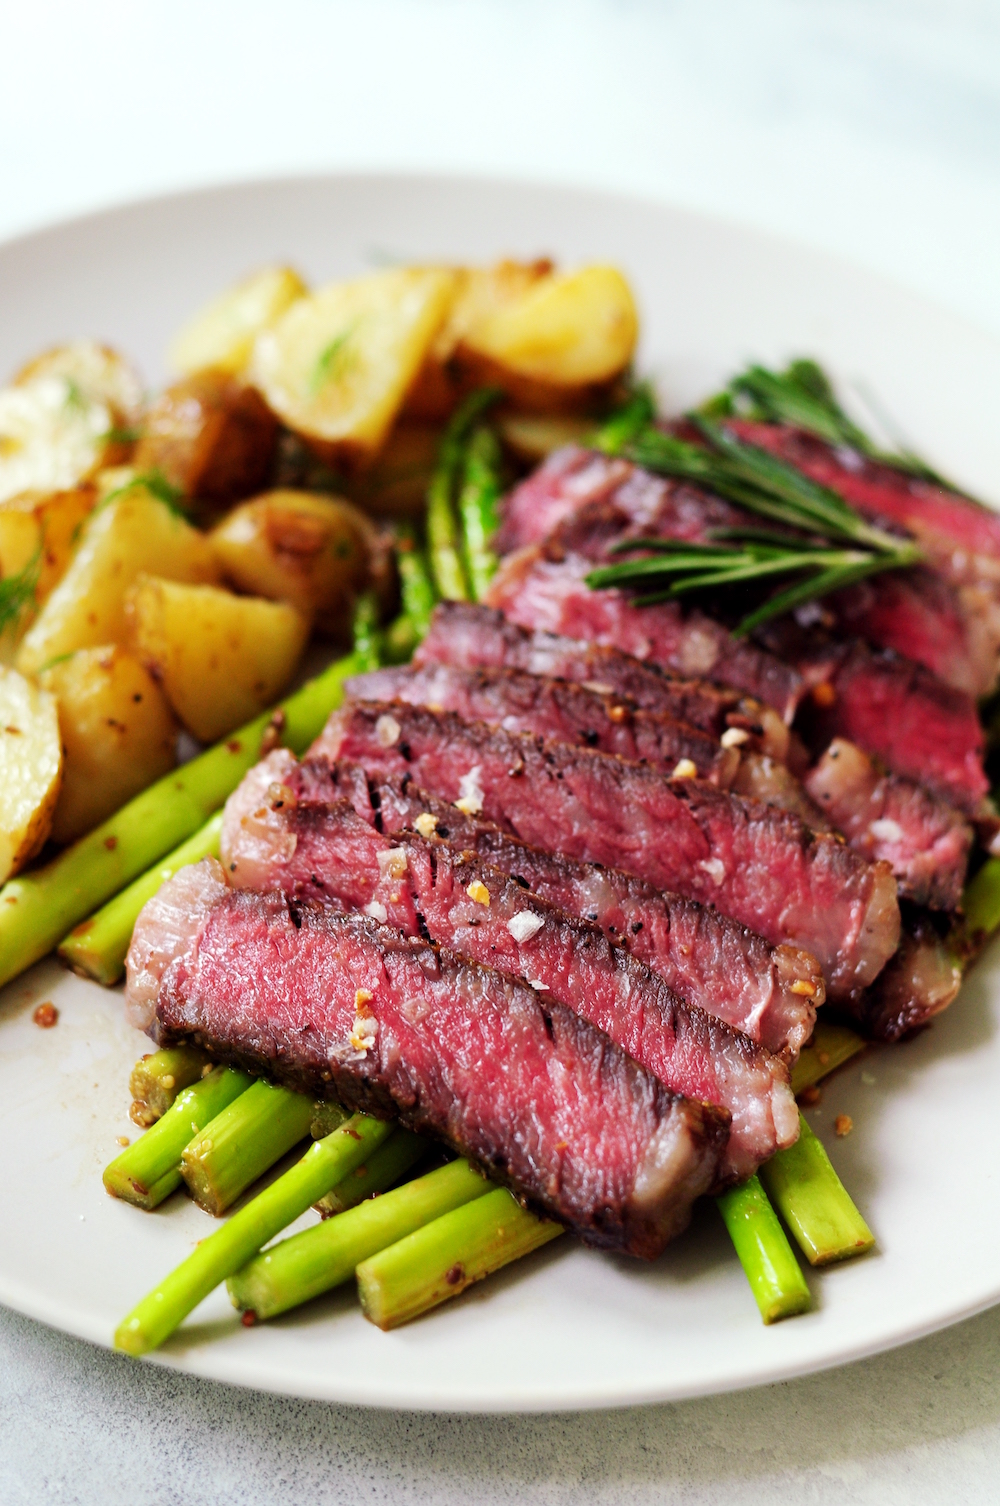 Sliced sous vide frozen steak with asparagus and potatoes